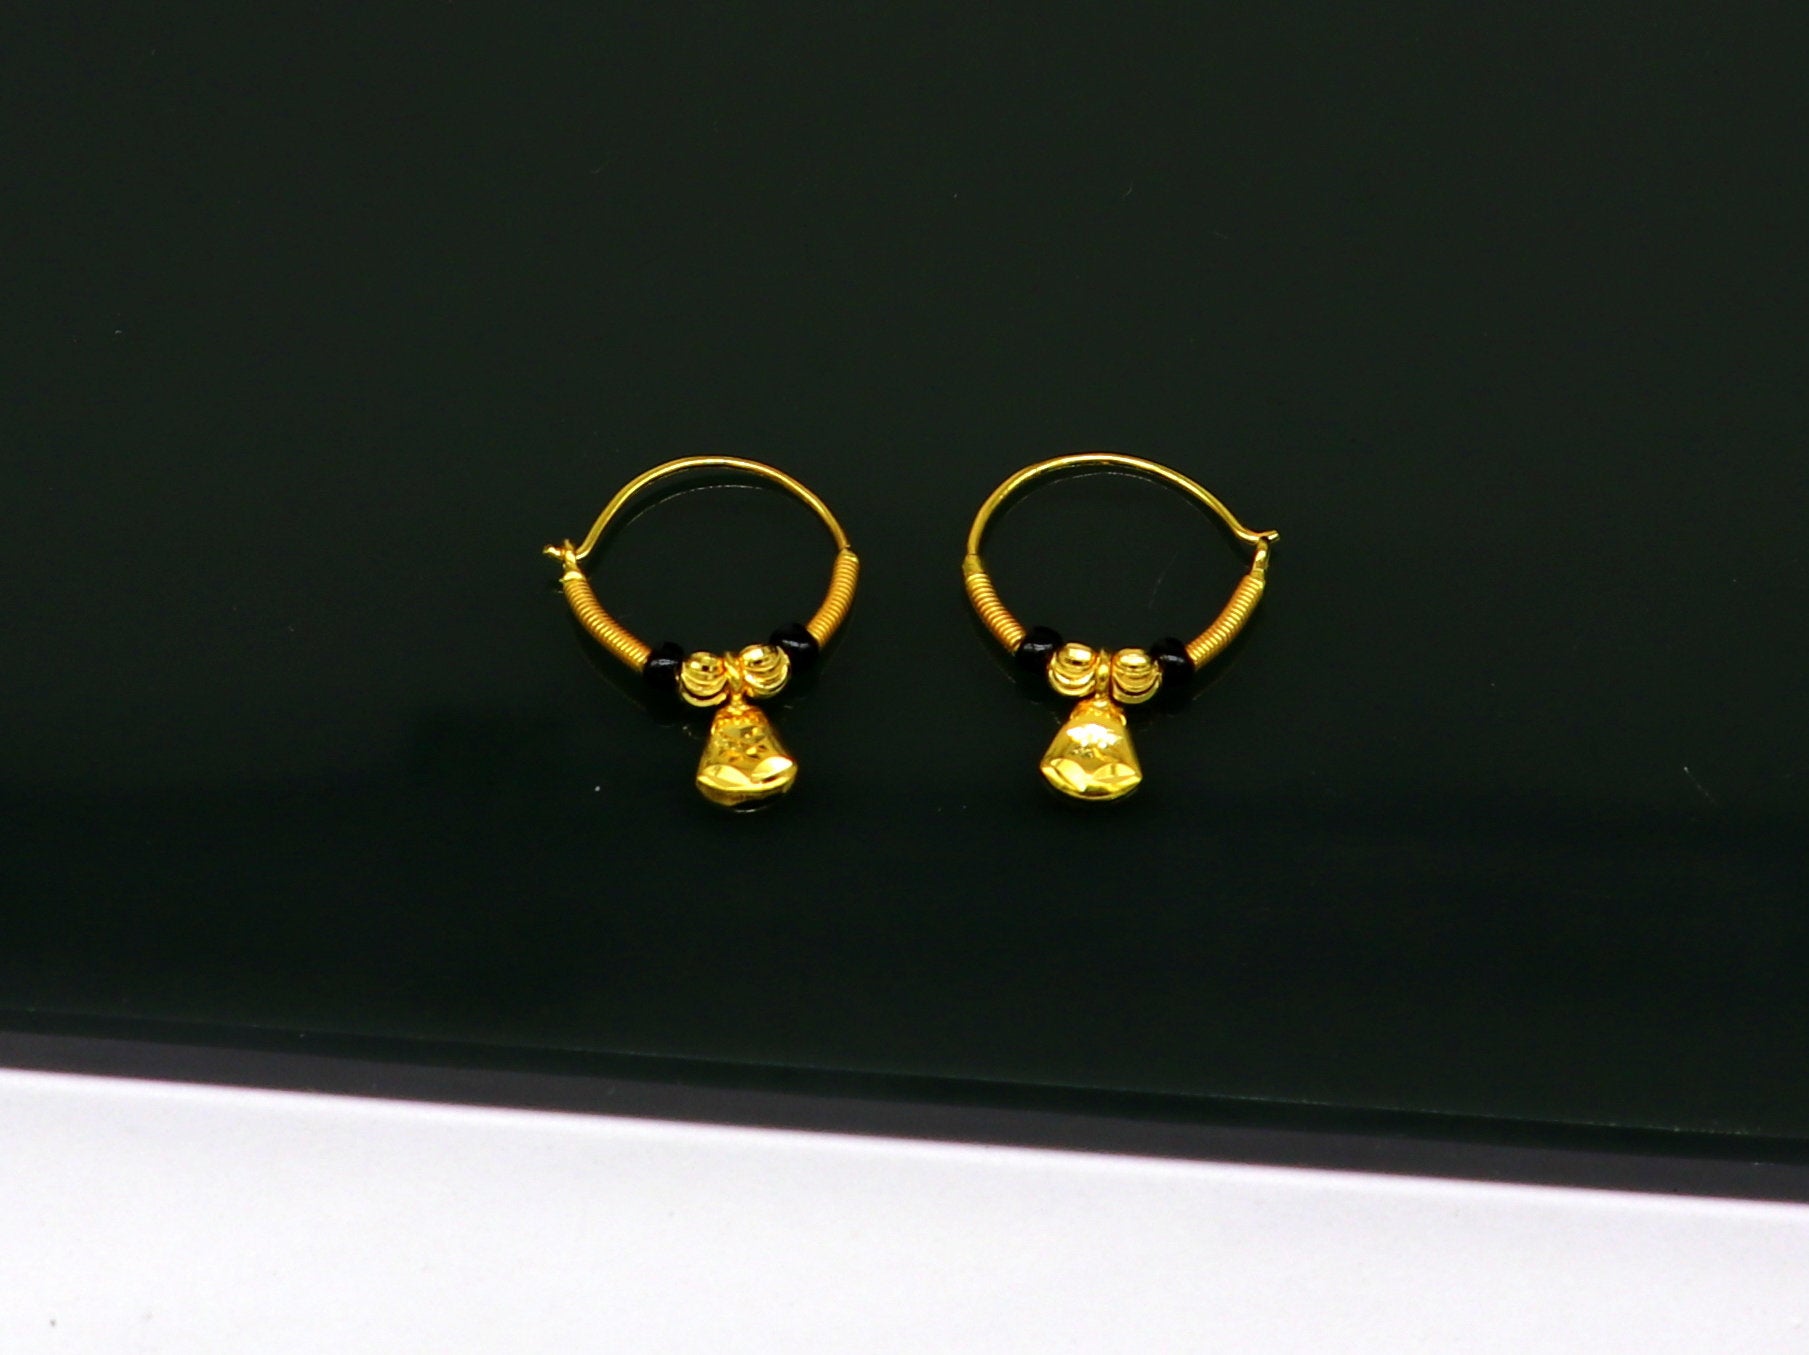 Buy Perrian Present Gold And Diamond Heart Earrings For Kids  -PER-C-109-RG-14K at Amazon.in